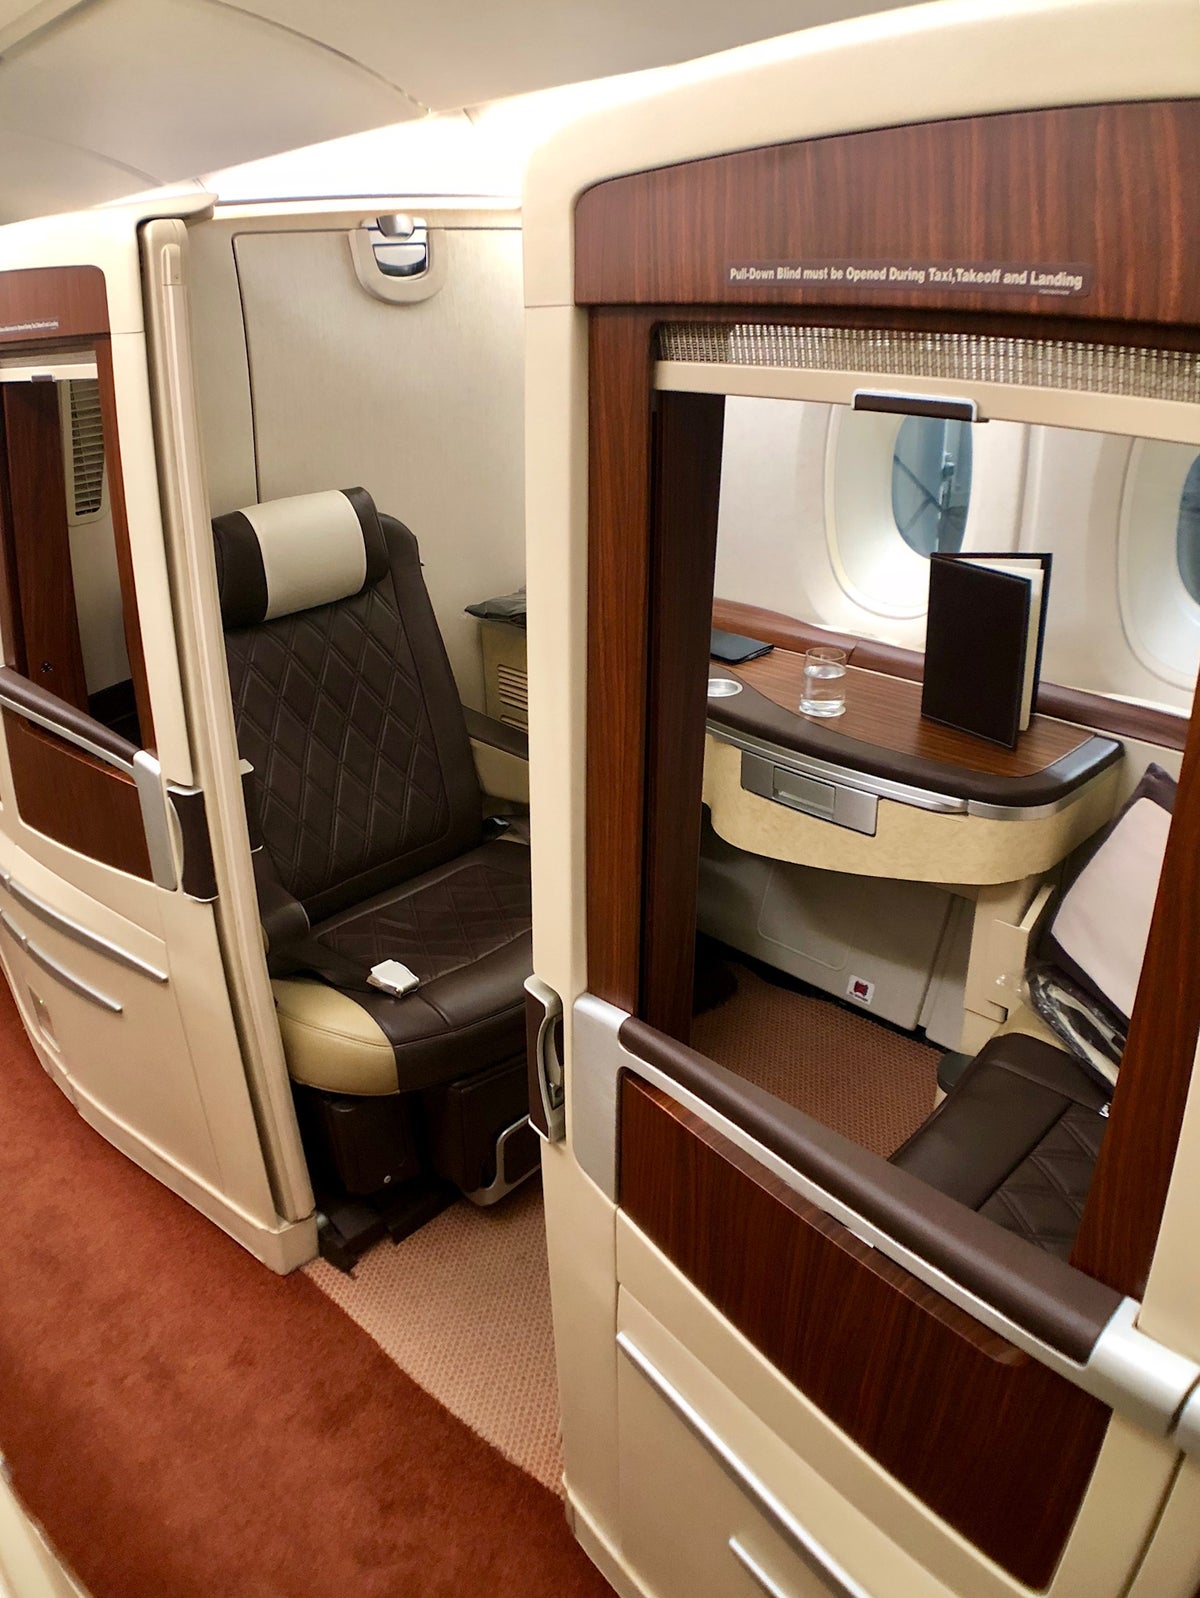 Singapore Airlines First Class Suites JFK to Frankfurt - Seat 2A View from Middle